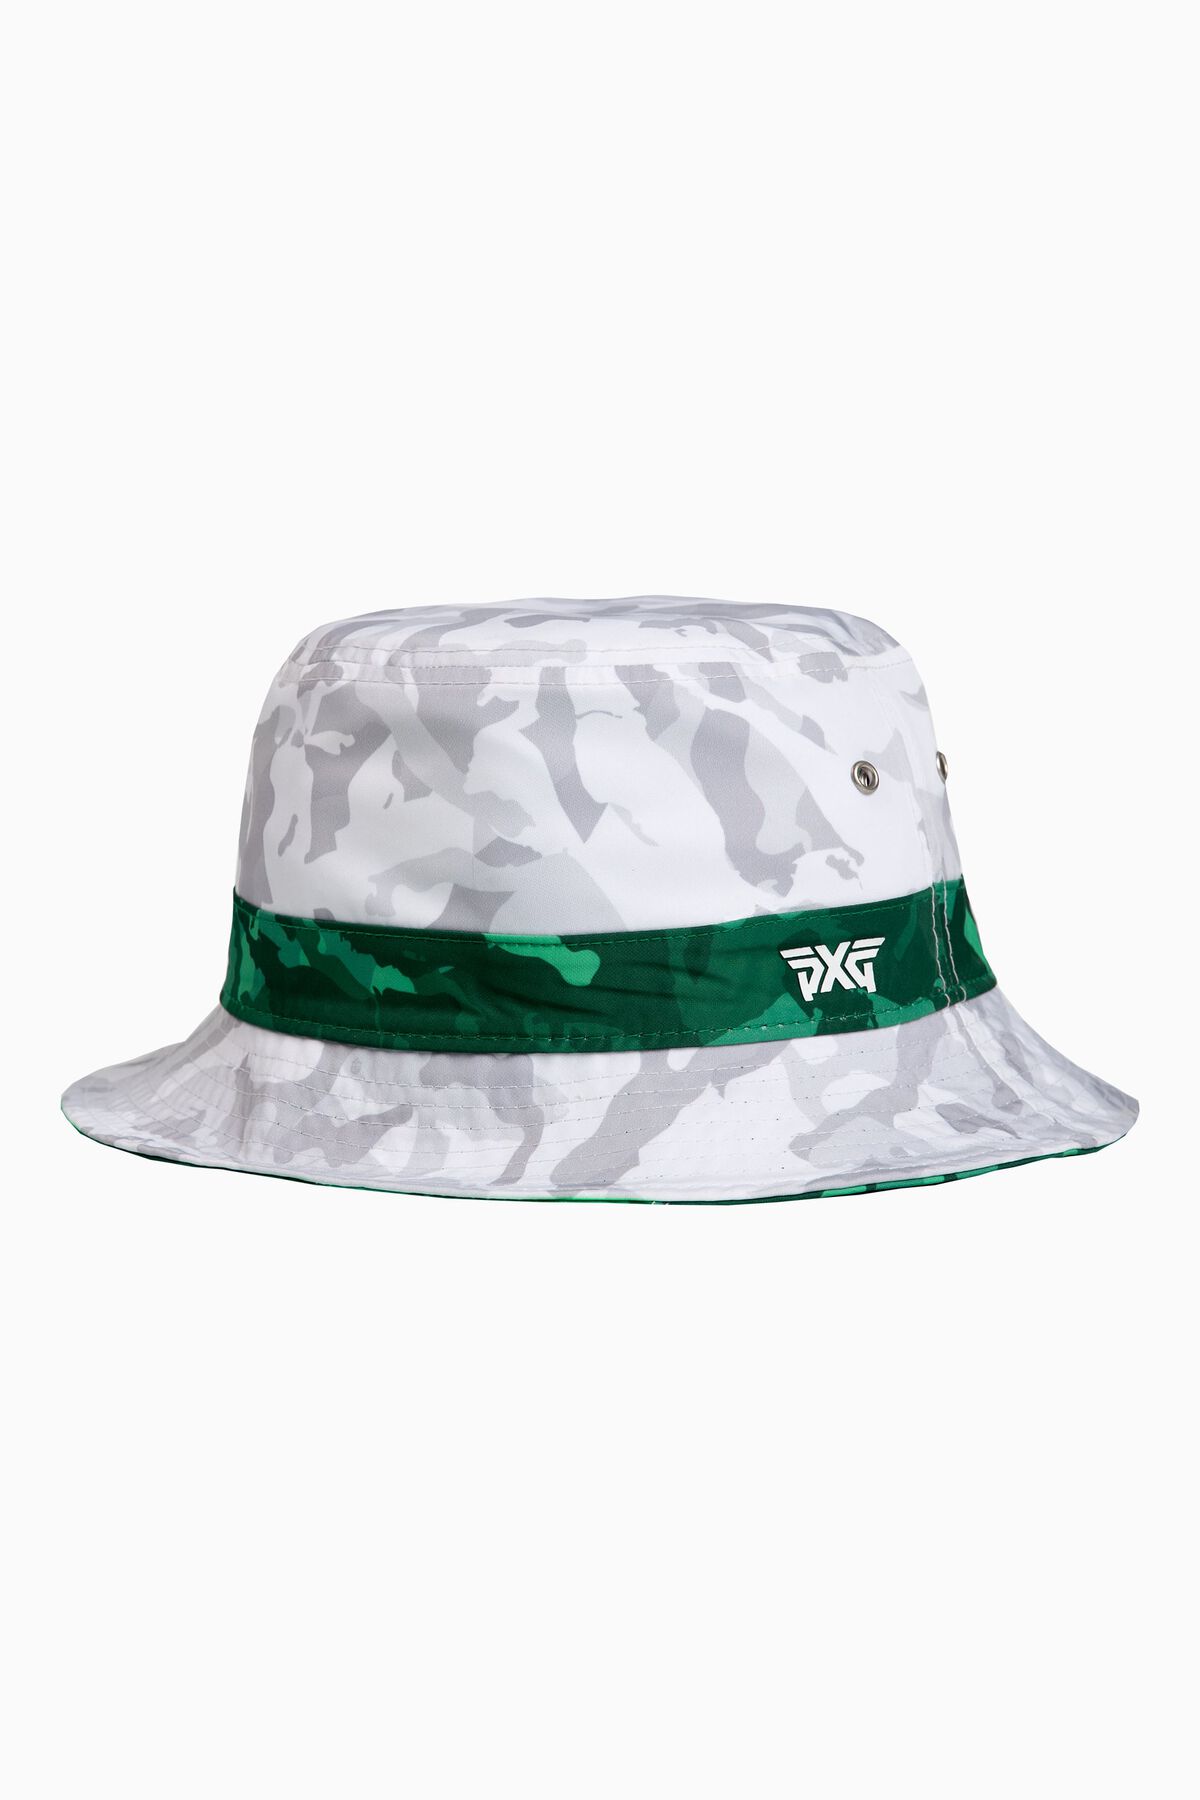 Phoenix Fairway Camo 2022 Reversable Bucket Hat  Shop the Highest Quality  Golf Apparel, Gear, Accessories and Golf Clubs at PXG